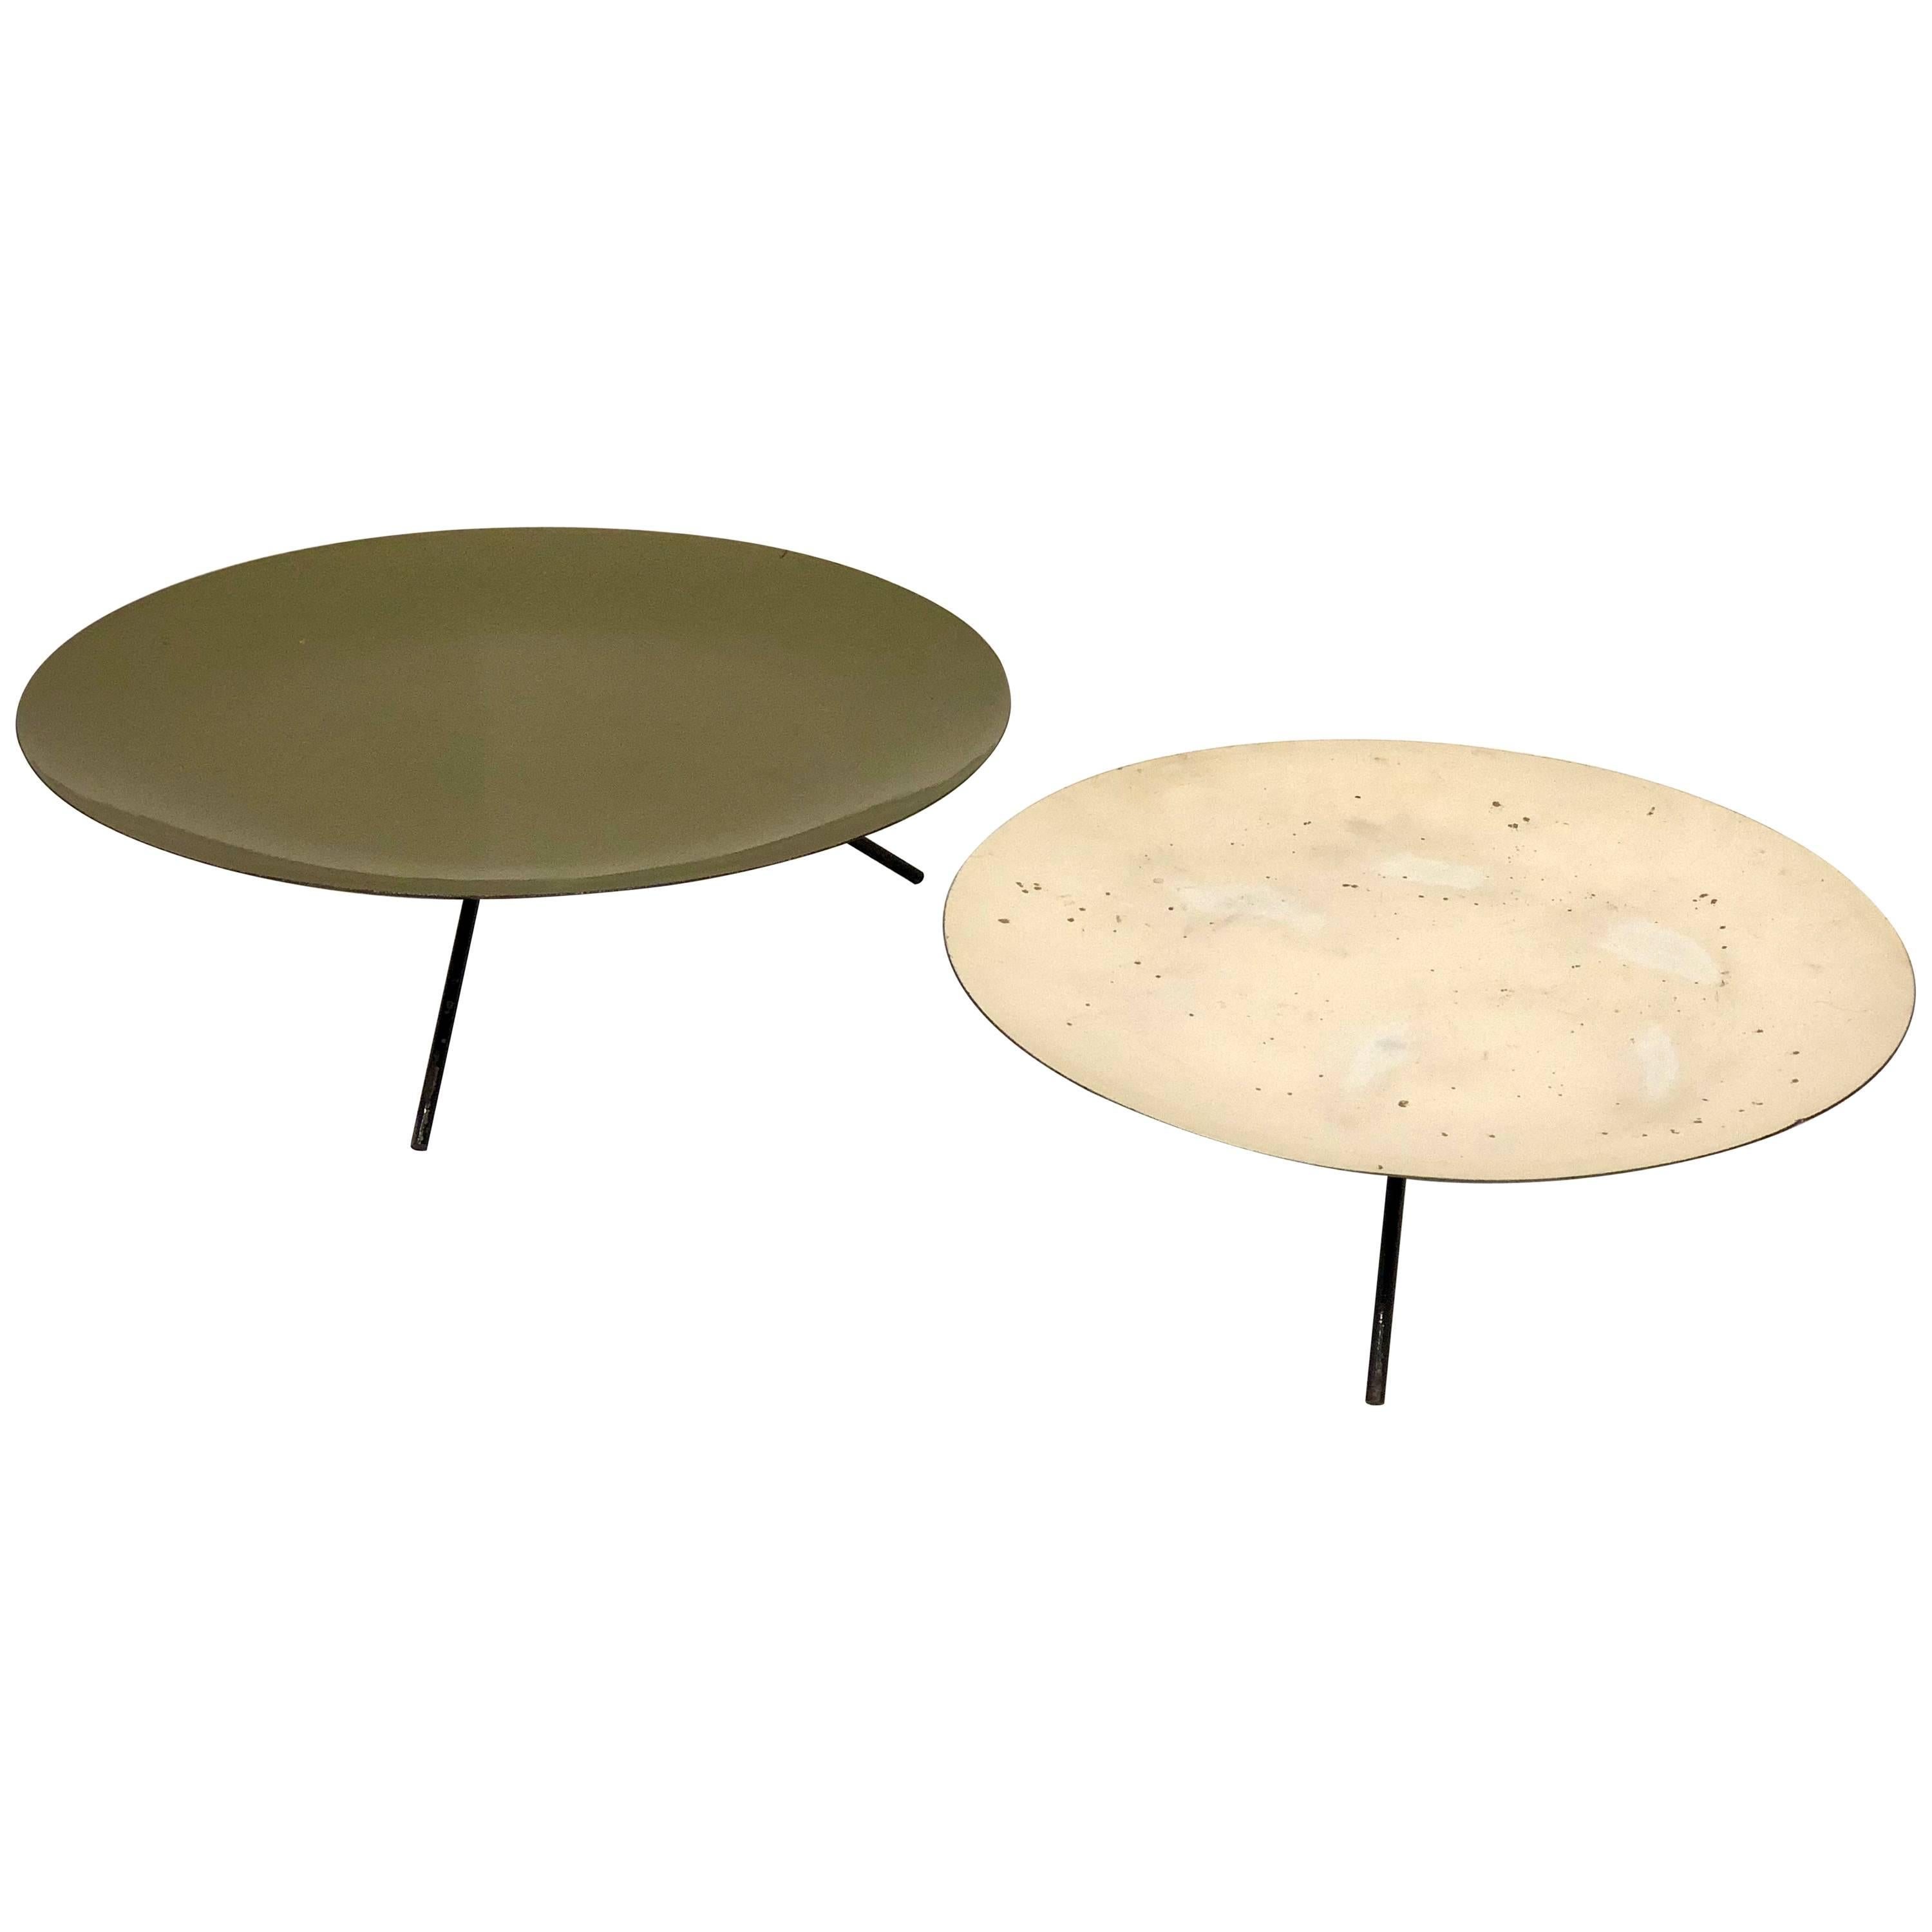 Pair of Atomic Age Enameled Metal Serving Trays by Trend of California Design